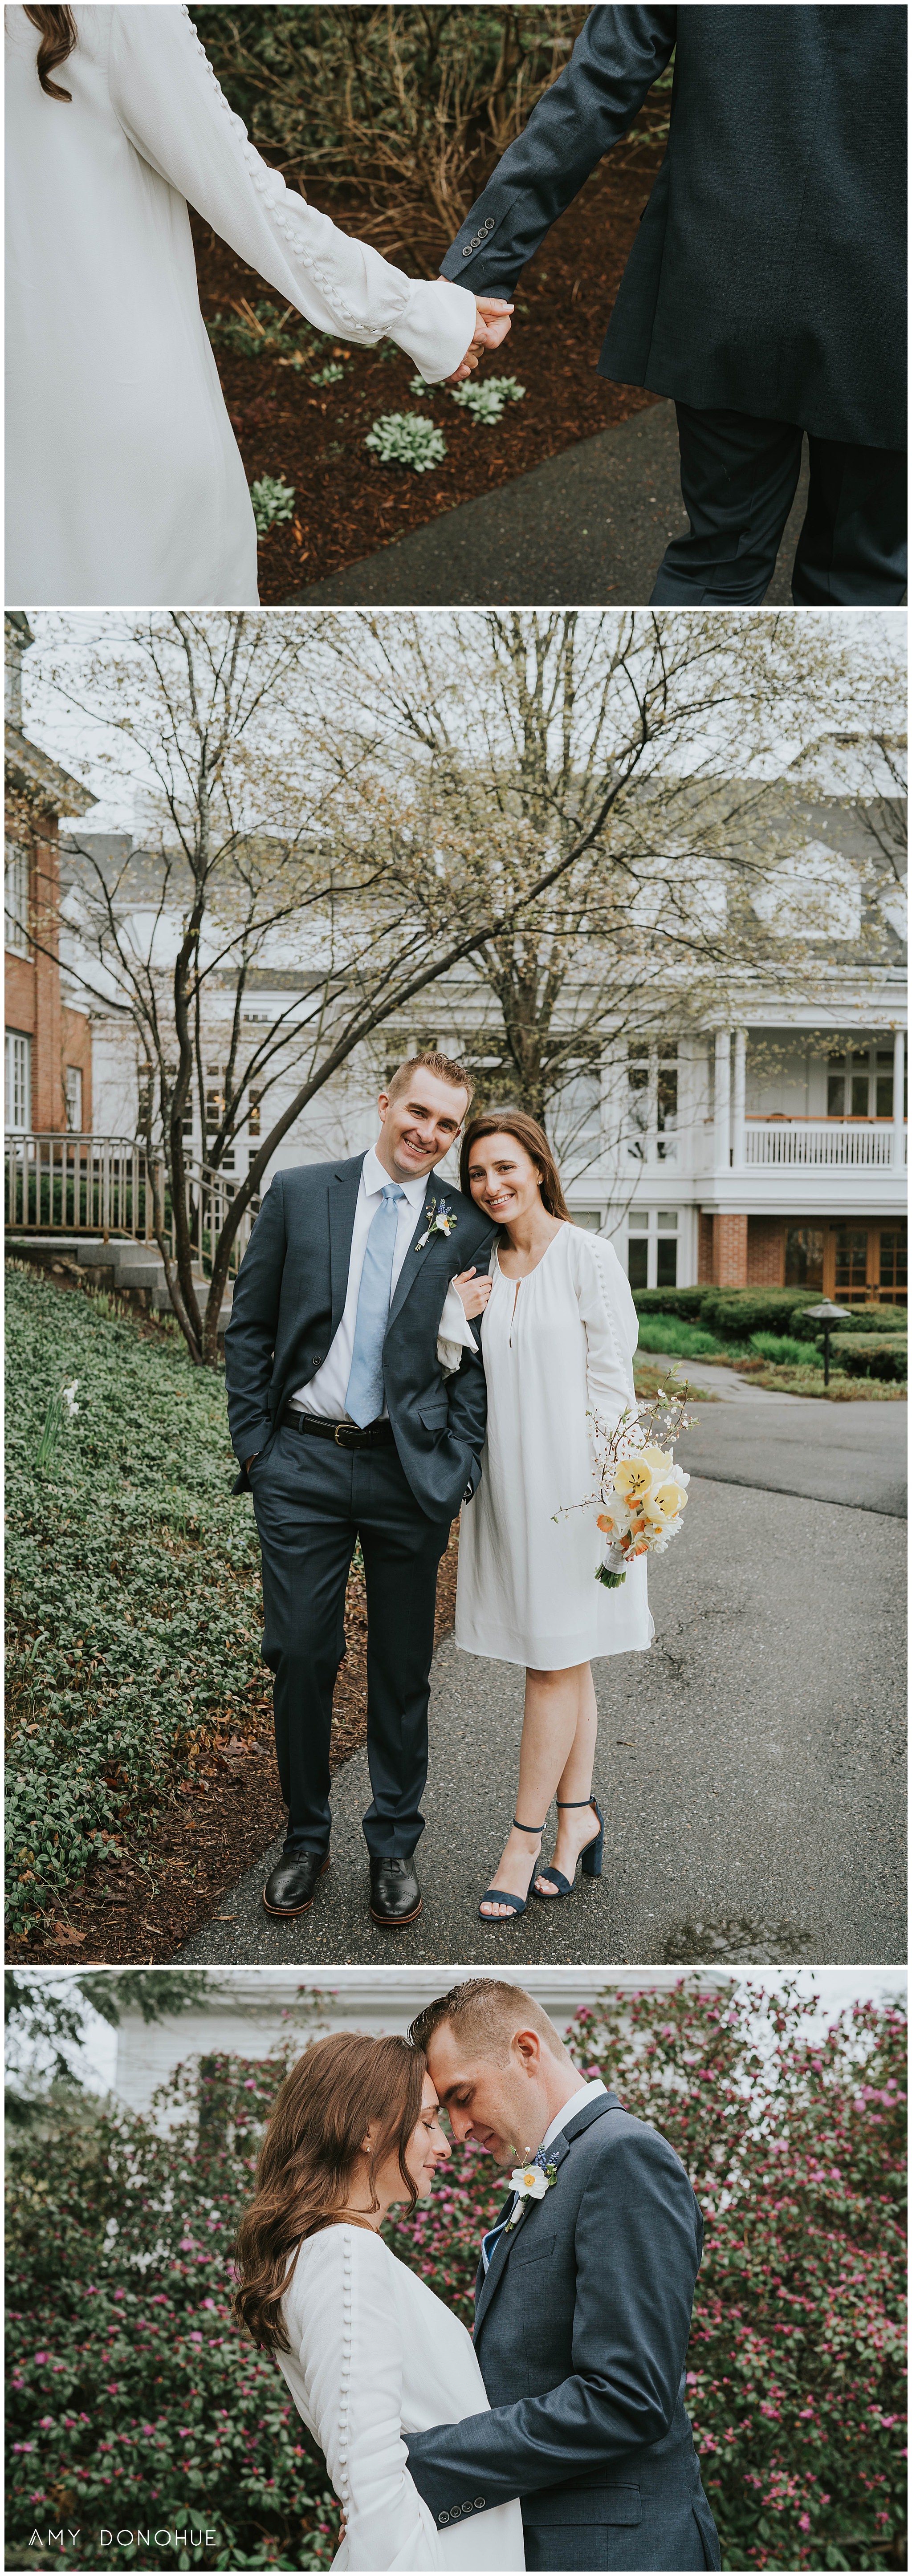 Intimate and romantic elopement portraits at the Woodstock Inn and Resort, Woodstock, Vermont